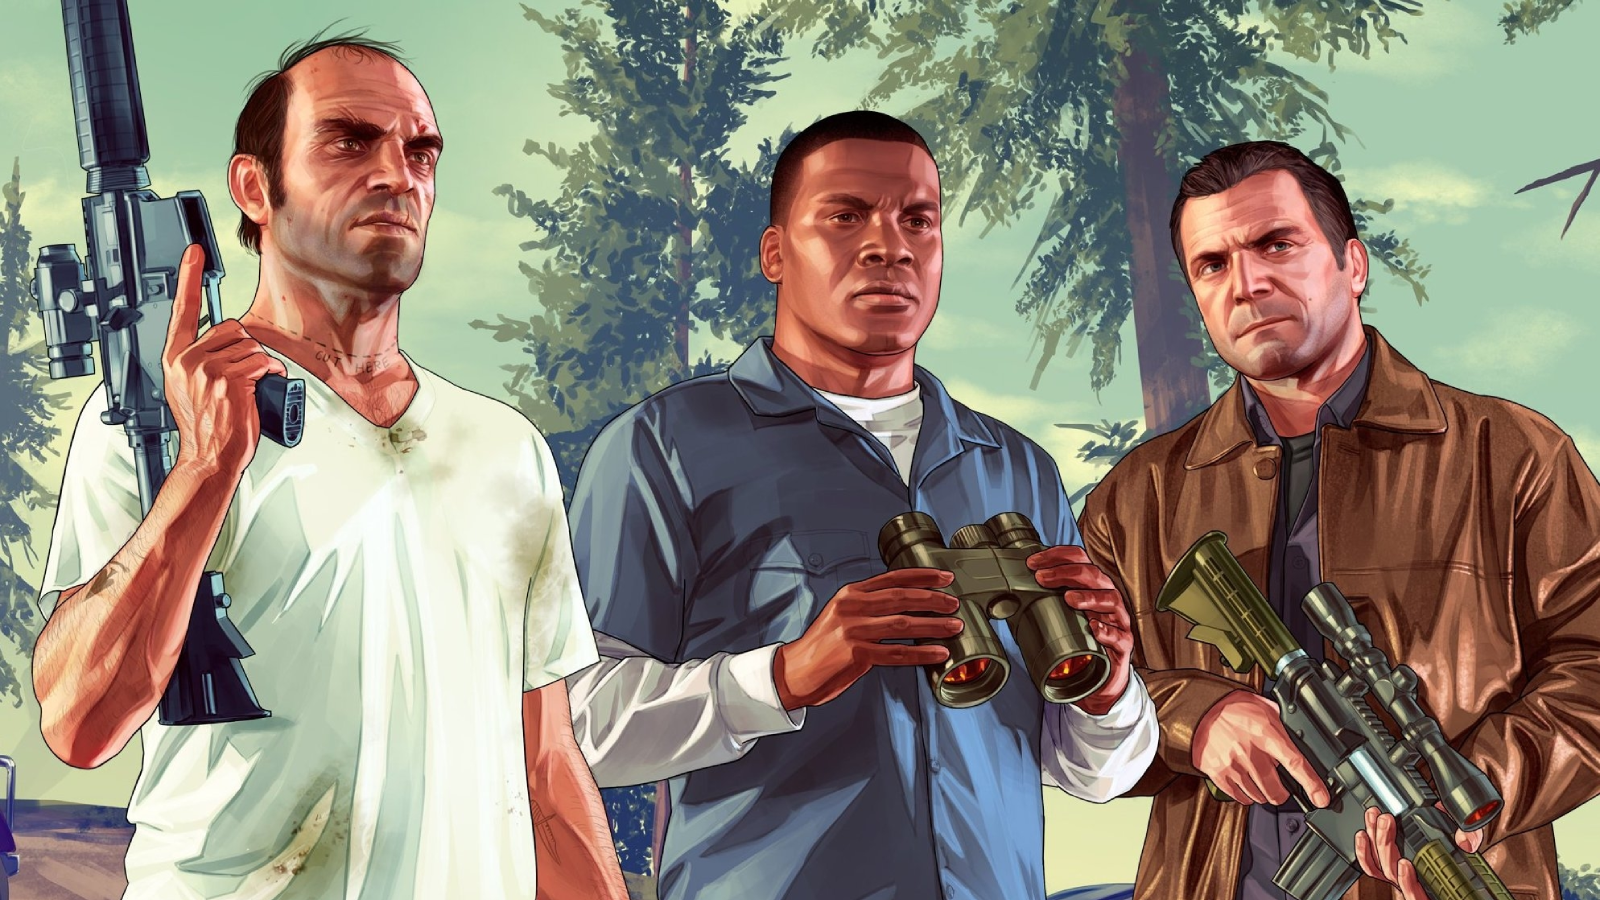 GTA 6 Trailer Release Date: 'GTA 6' trailer release date confirmed by  publisher Rockstar Games - The Economic Times